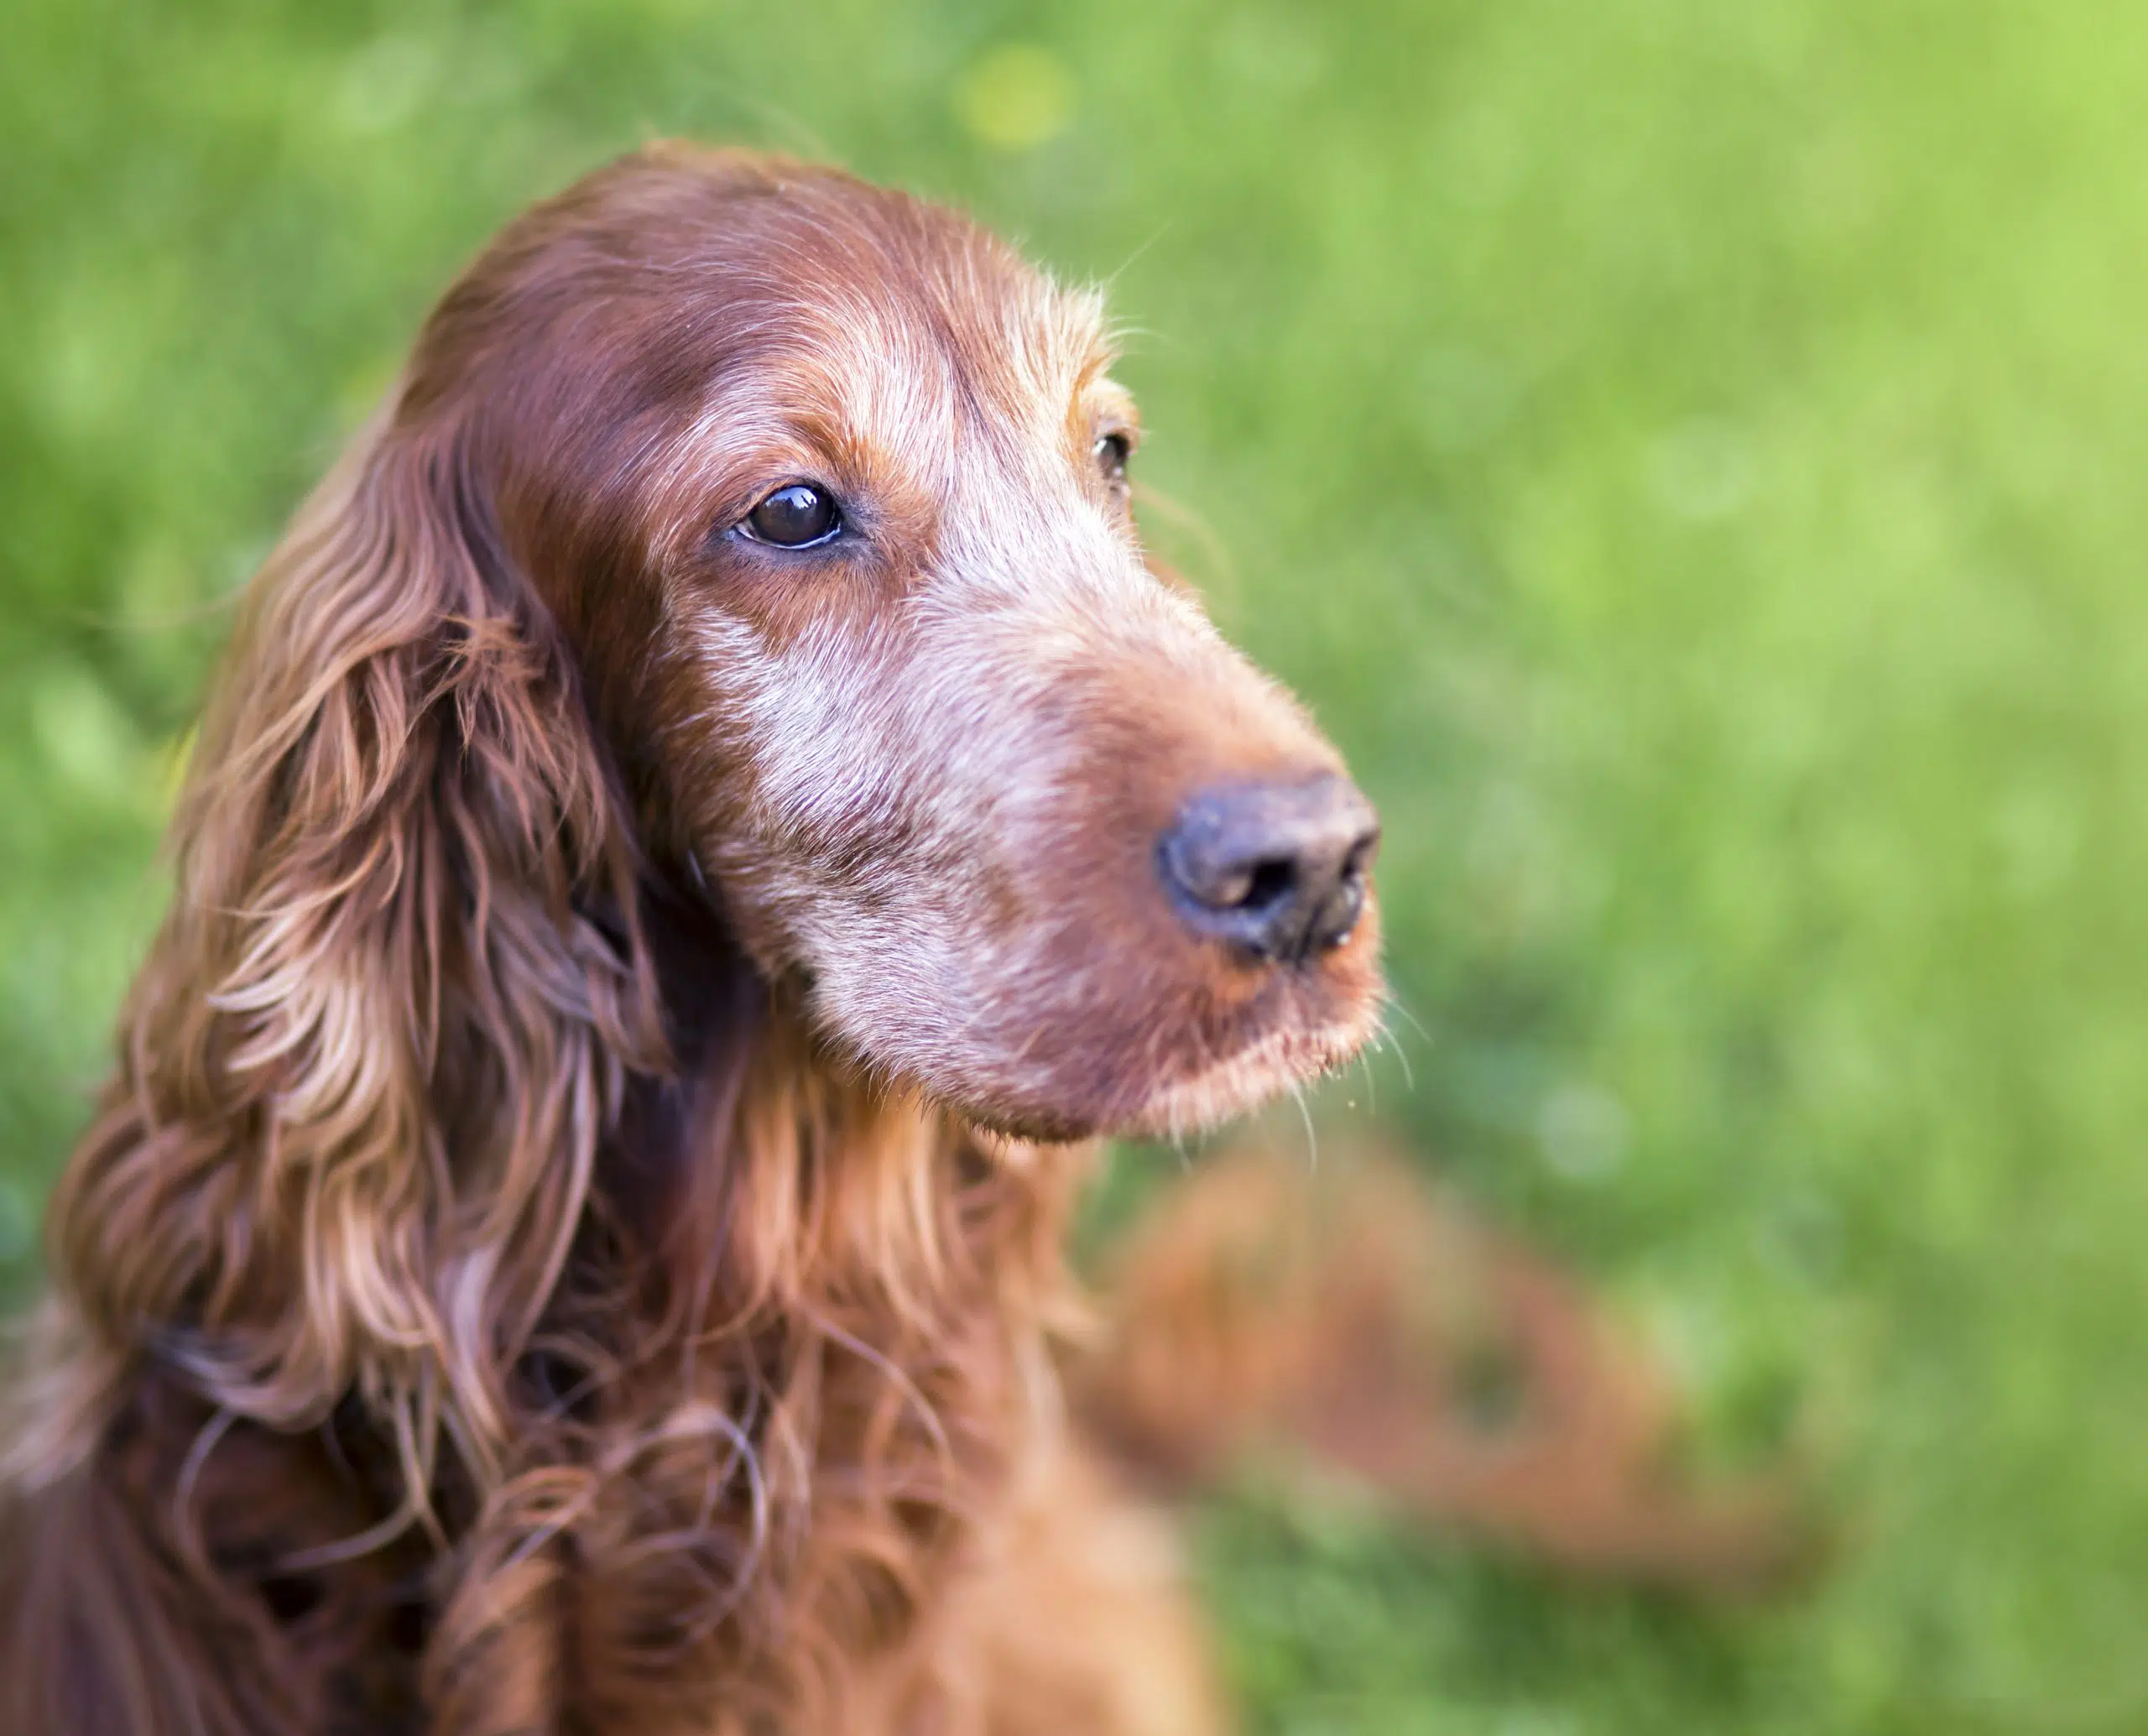 When to consider euthanasia for your pet